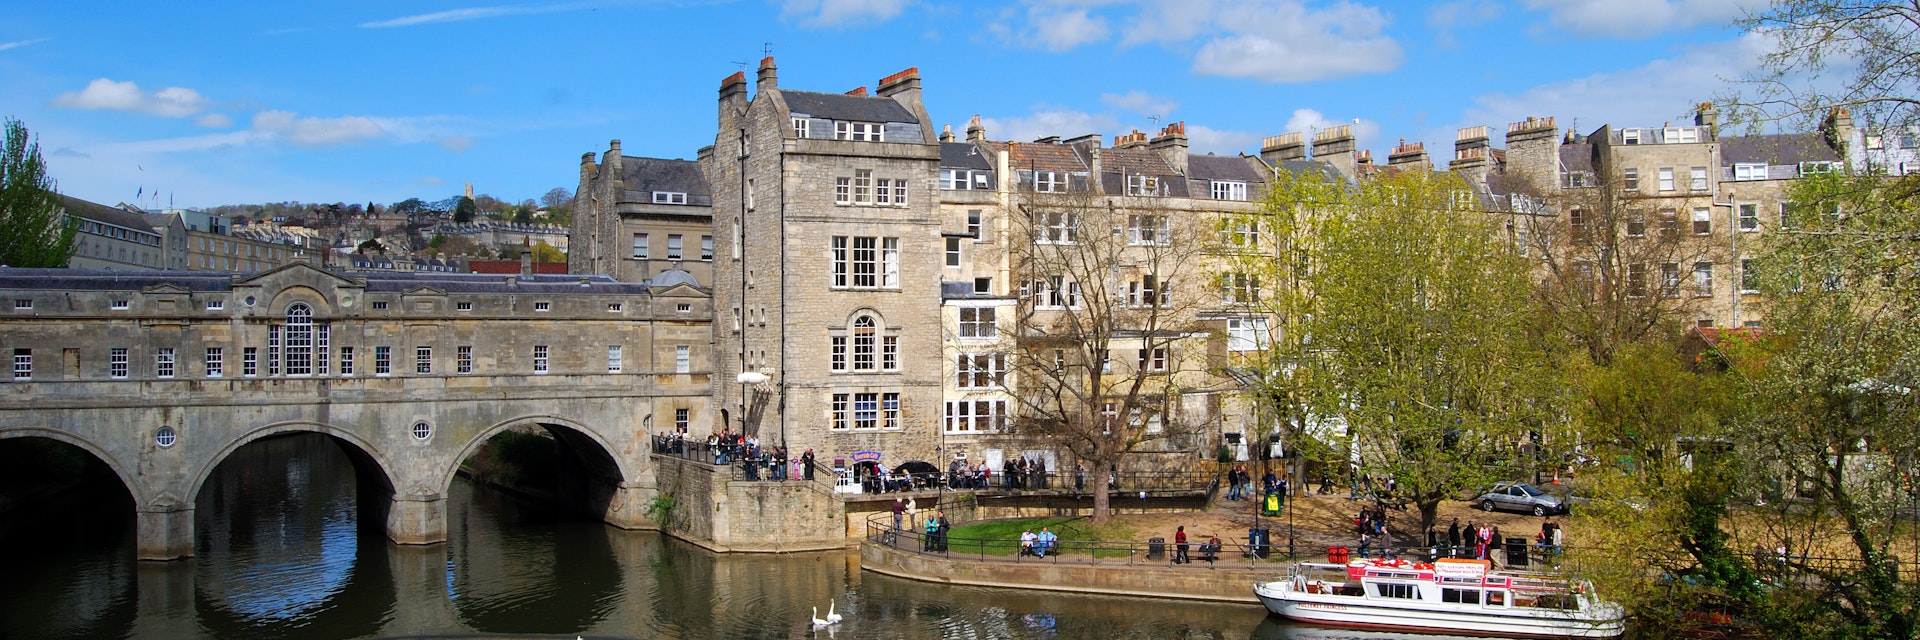 Pulteney Bridge in historical town of Bath, Somerset, England
28668616
ancient, anciet, arch, avon, bath, bird, boat, brick, bridge, building, cruise, cruising, england, fall, garden, grass, green, heritage, historical, holiday, house, landmark, landscape, man, nature, old, outdoor, park, people, pulteney, relax, river, roman, roof, sky, somerset, spring, summer, sun, sunny, tower, town, tree, water, window